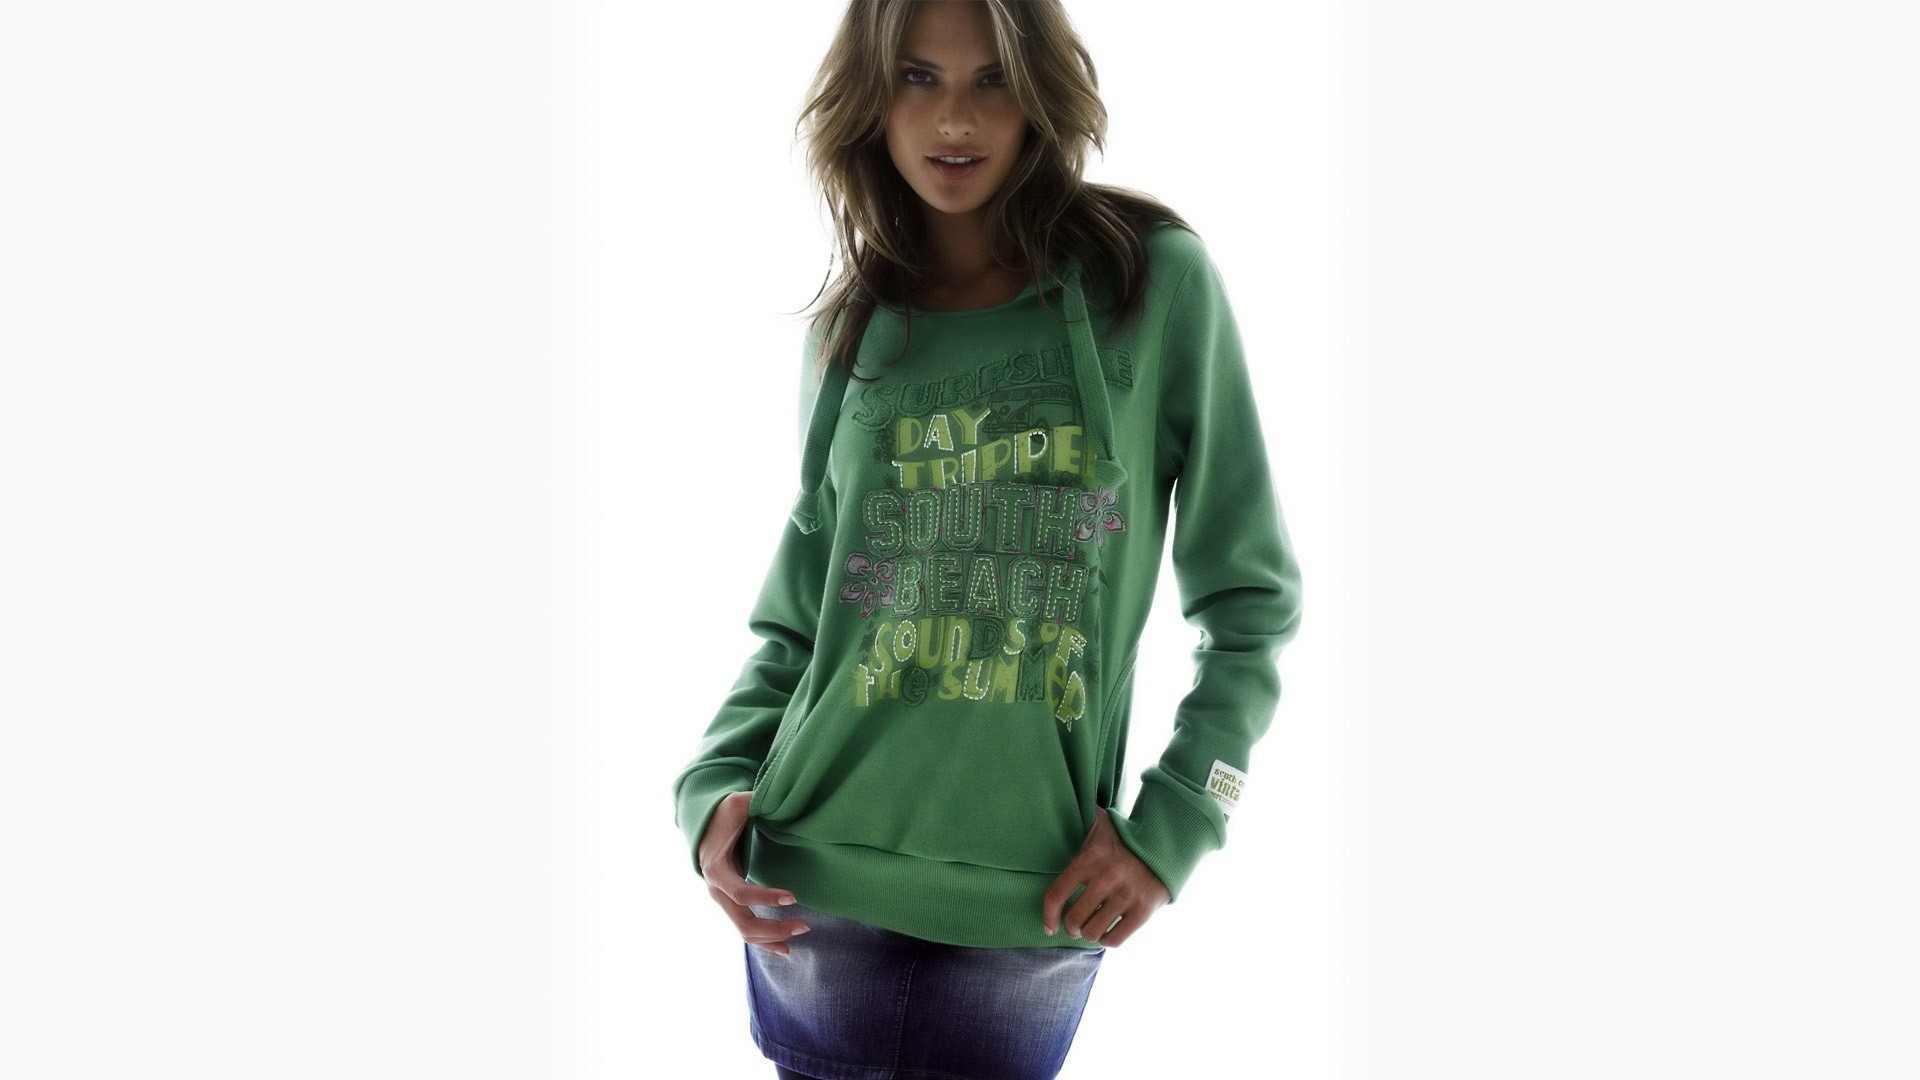 Wallpaper, women, model, T shirt, simple background, green, jacket, hood, sweater, leather, spring, clothing, magenta, Alessandra Ambrosio, pocket, hoodie, textile, photo shoot, outerwear, sleeve, blouse 1920x1080